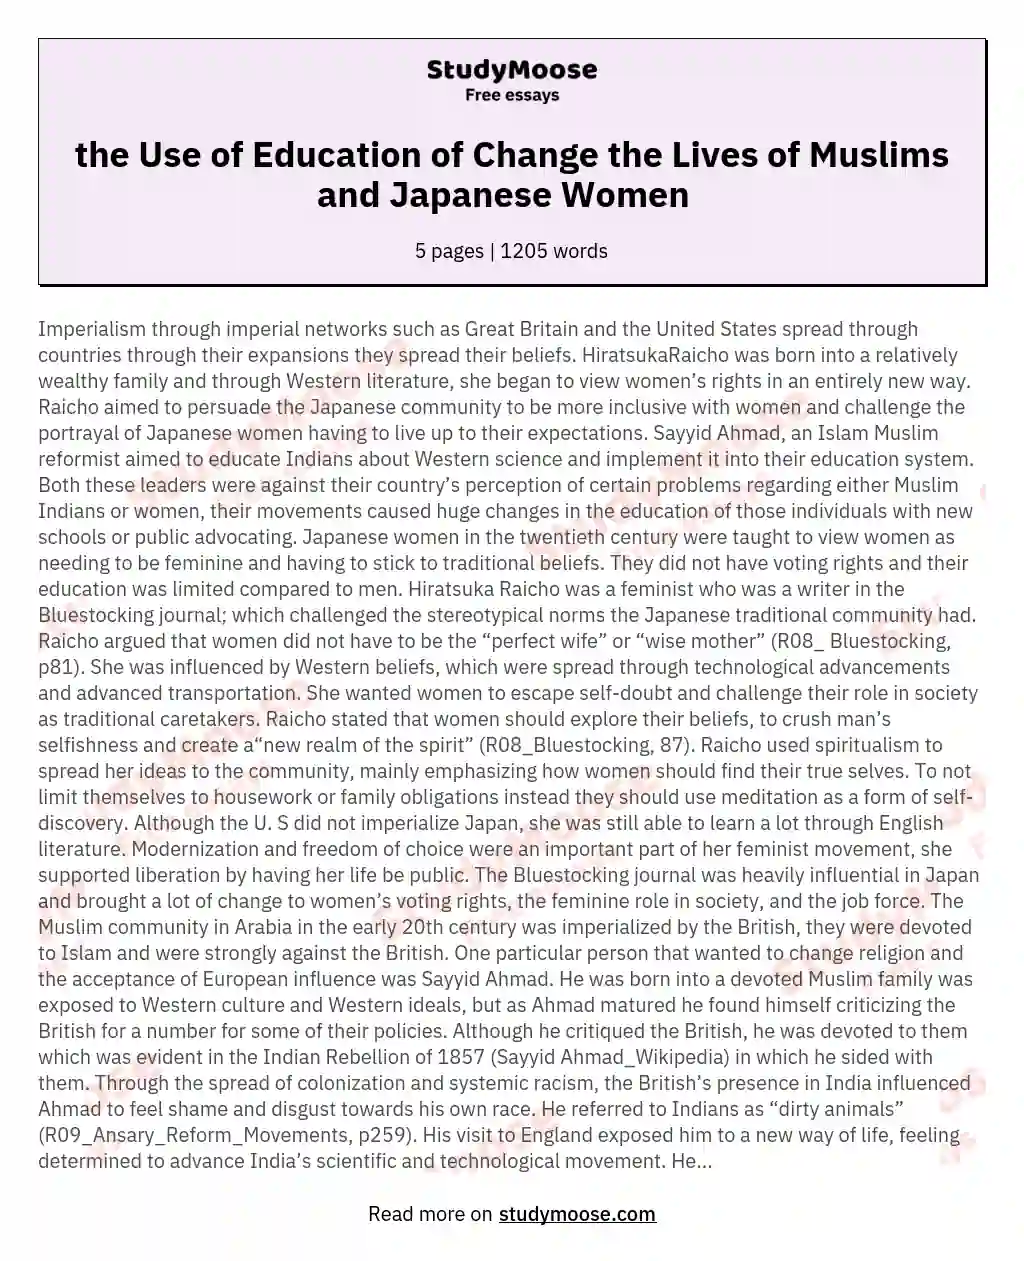 the Use of Education of Change the Lives of Muslims and Japanese Women   essay